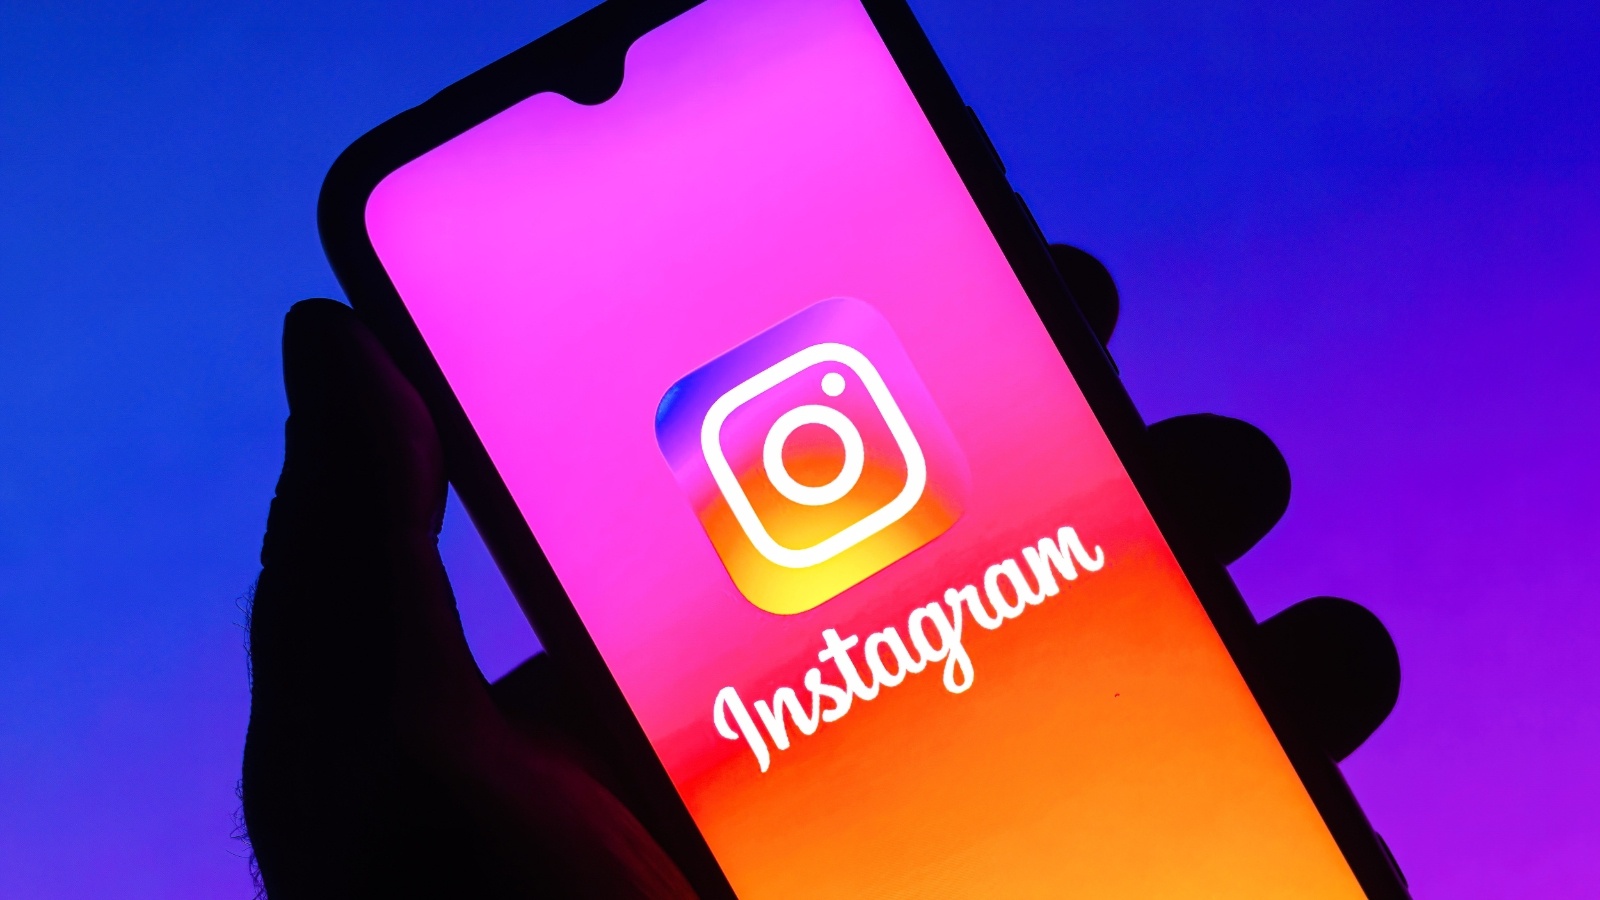 The best time to post on Instagram